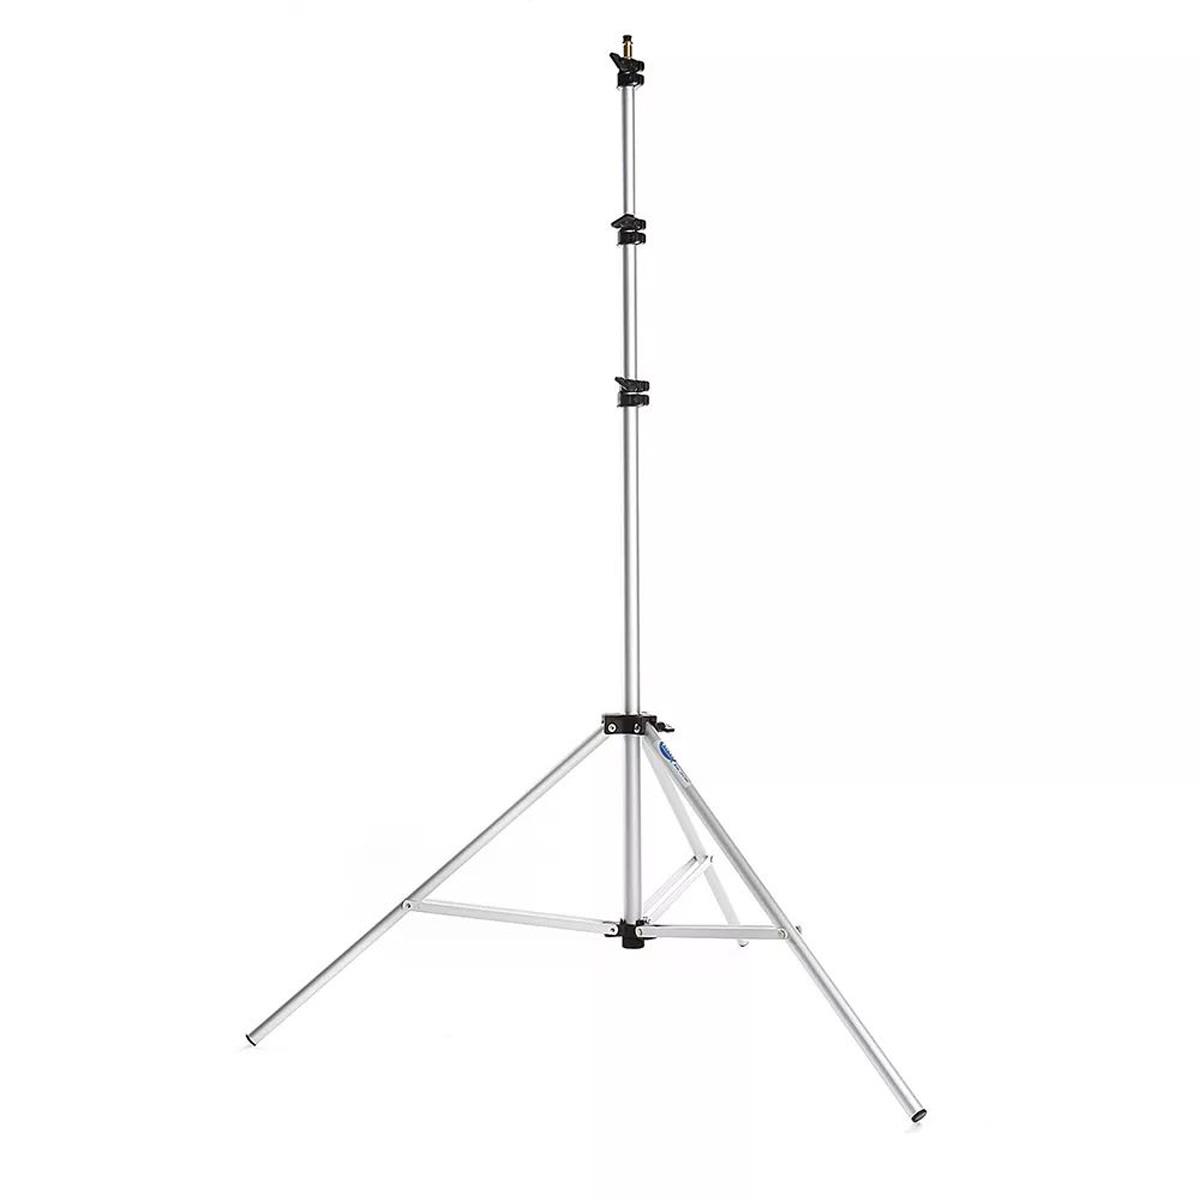 Savage 10' Four-Section Heavy Duty Air- Cushioned Light Stand - Black